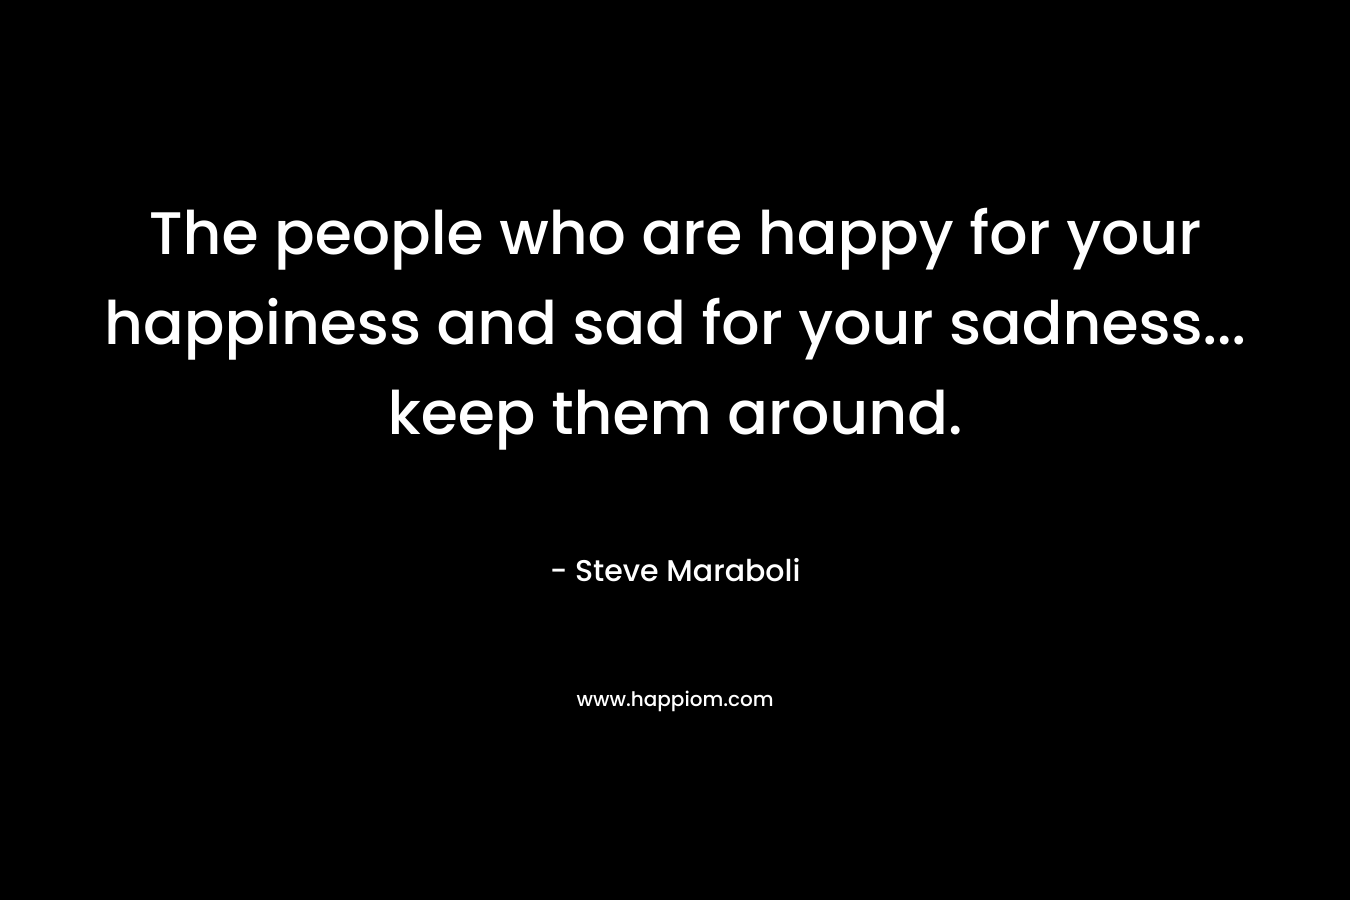 The people who are happy for your happiness and sad for your sadness... keep them around.